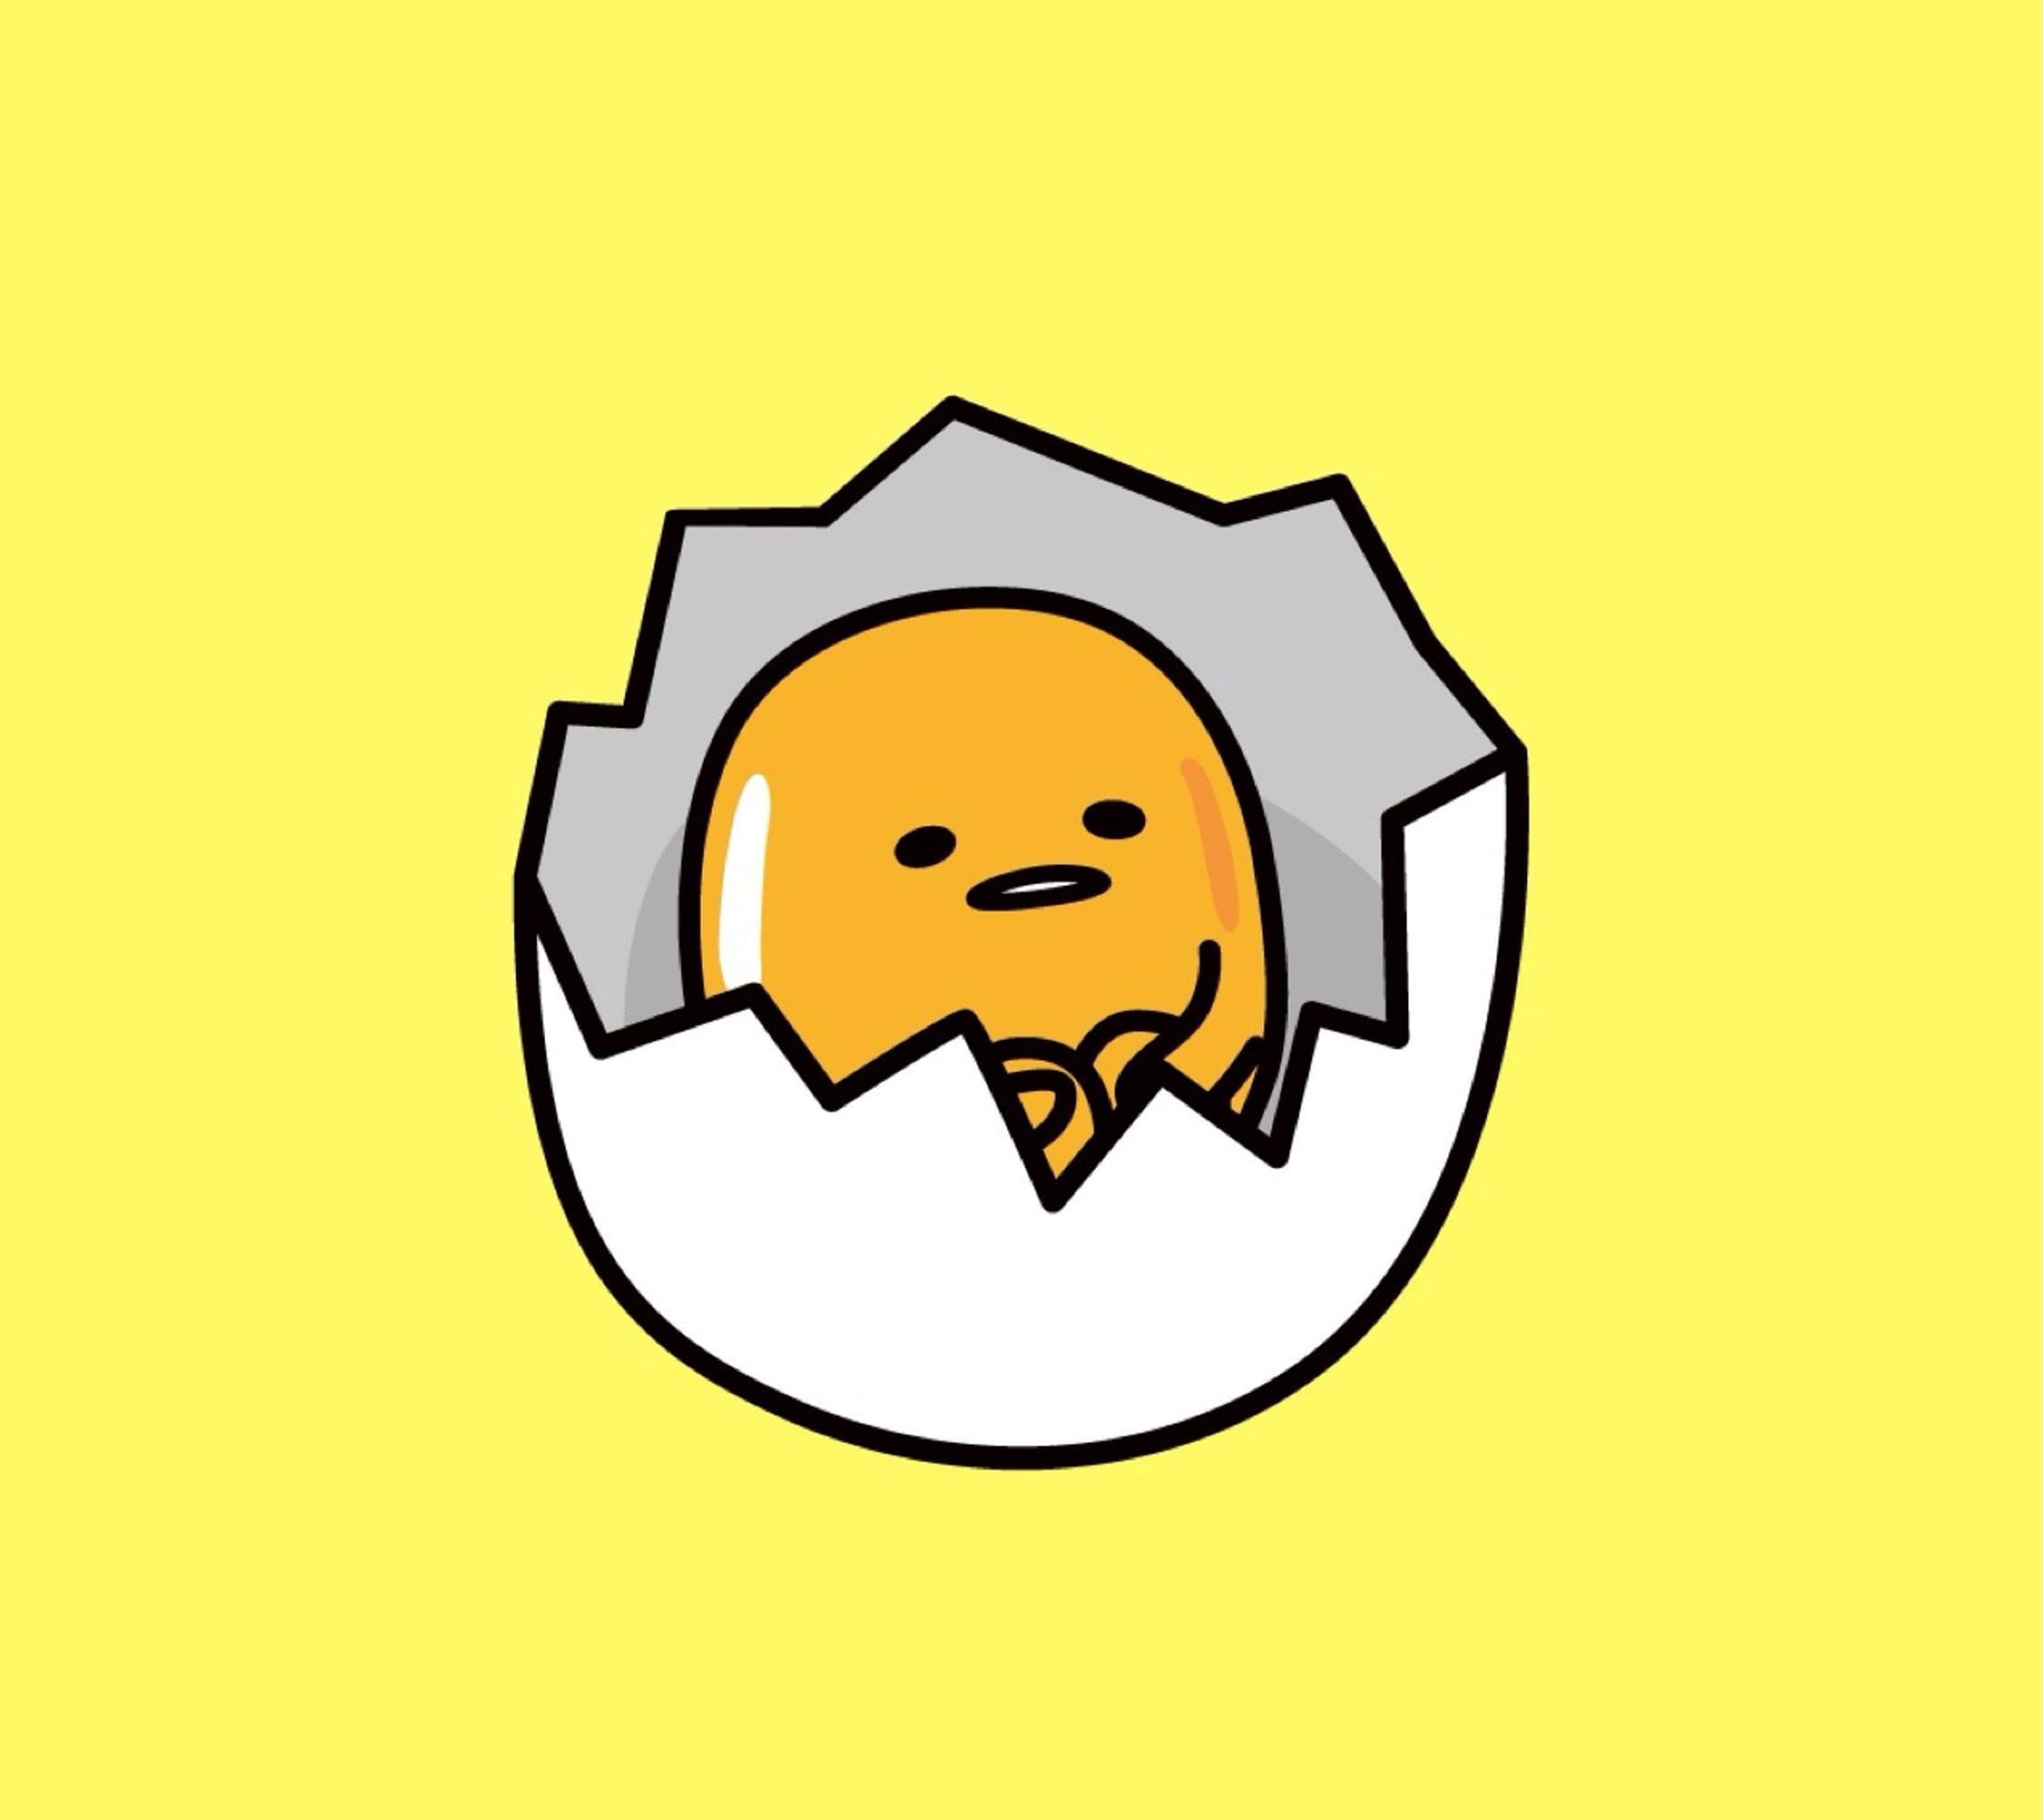 A cracked egg with a yellow face inside. - Gudetama